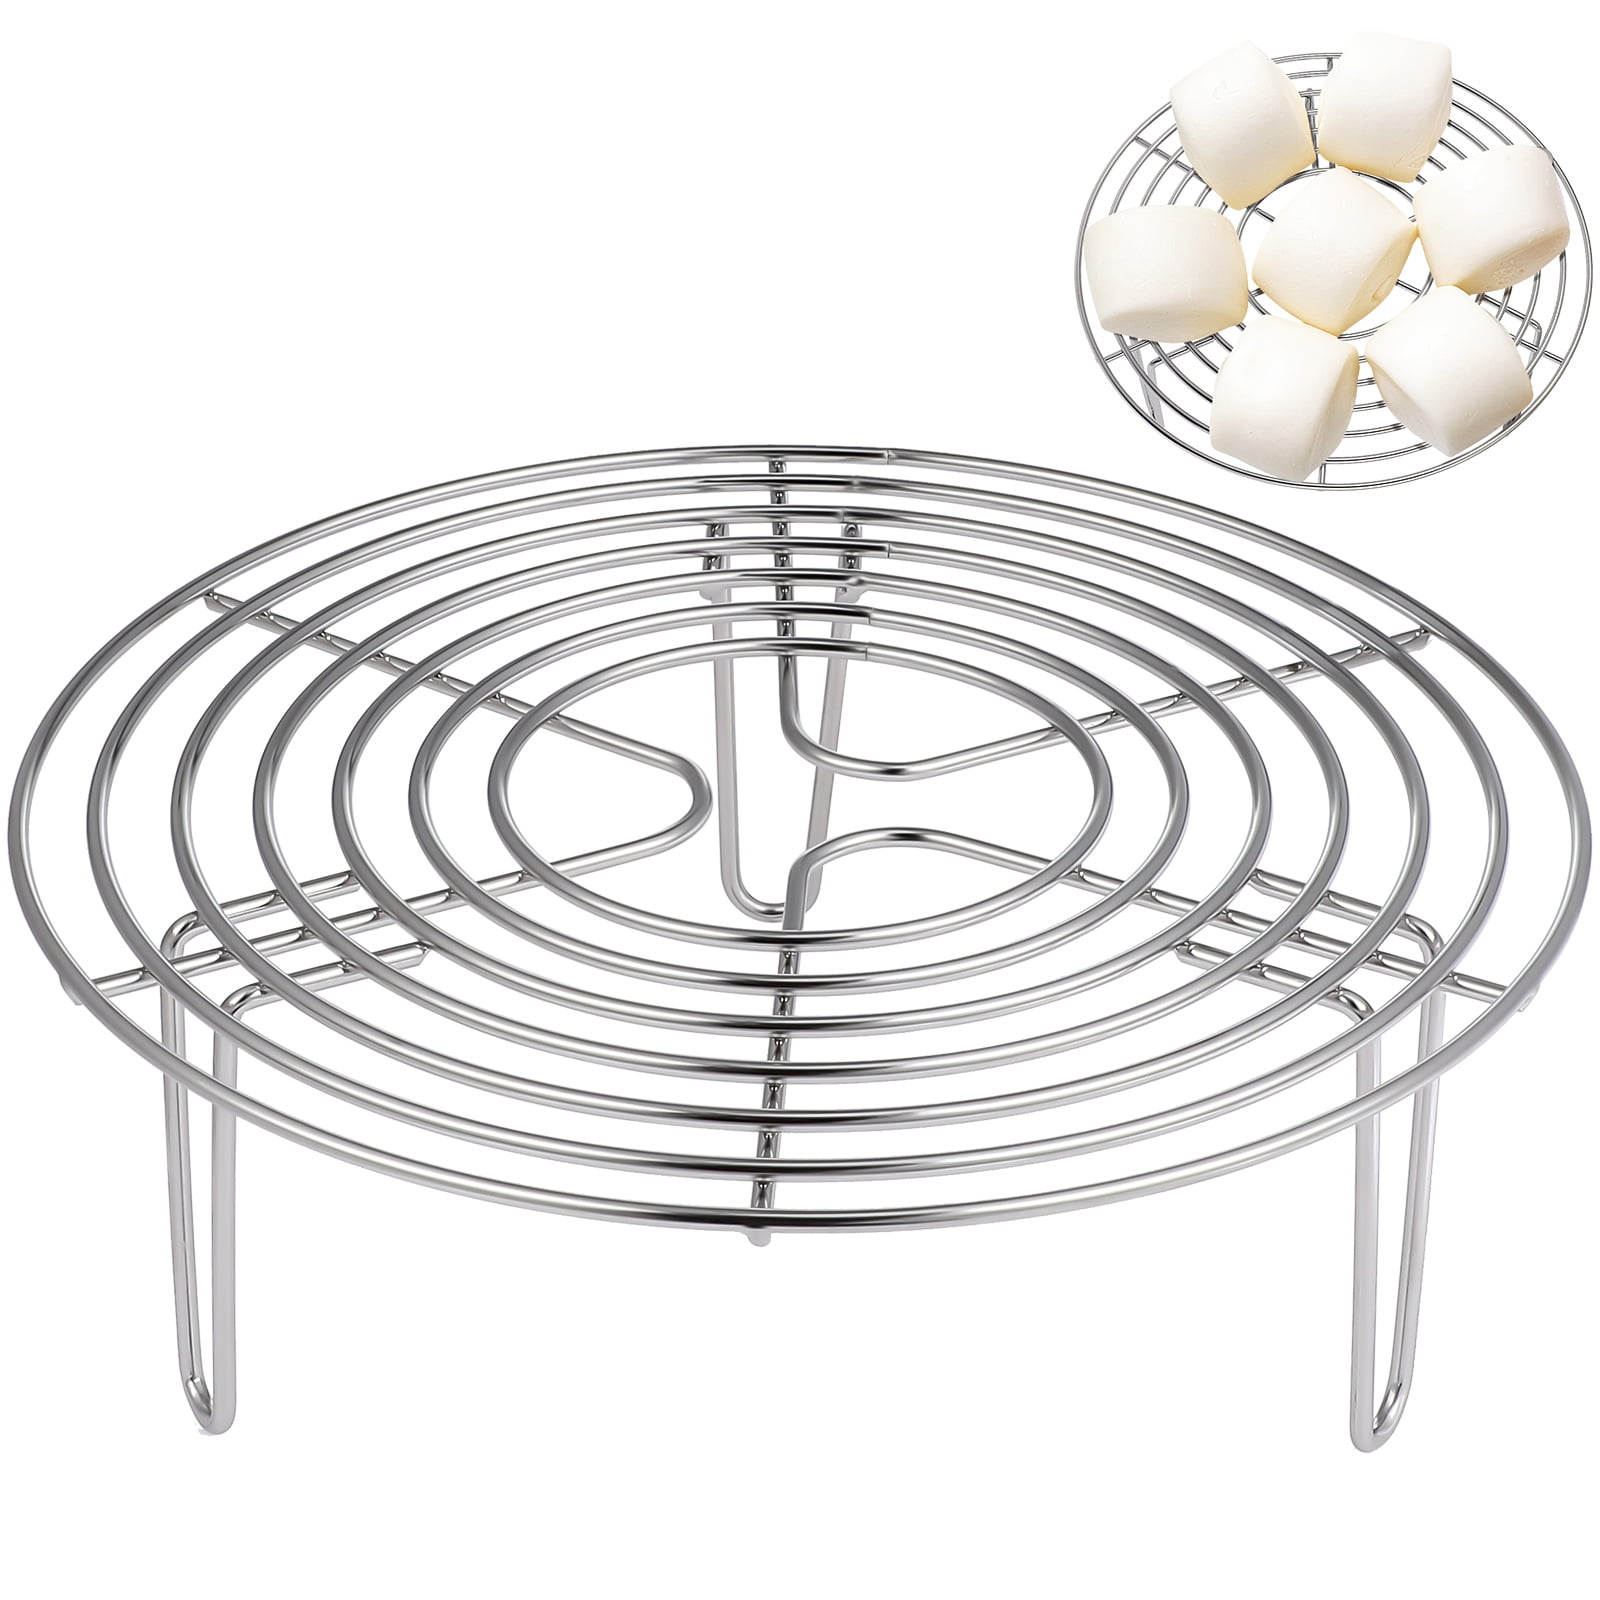 The practicality of the stainless steel round steamer rack